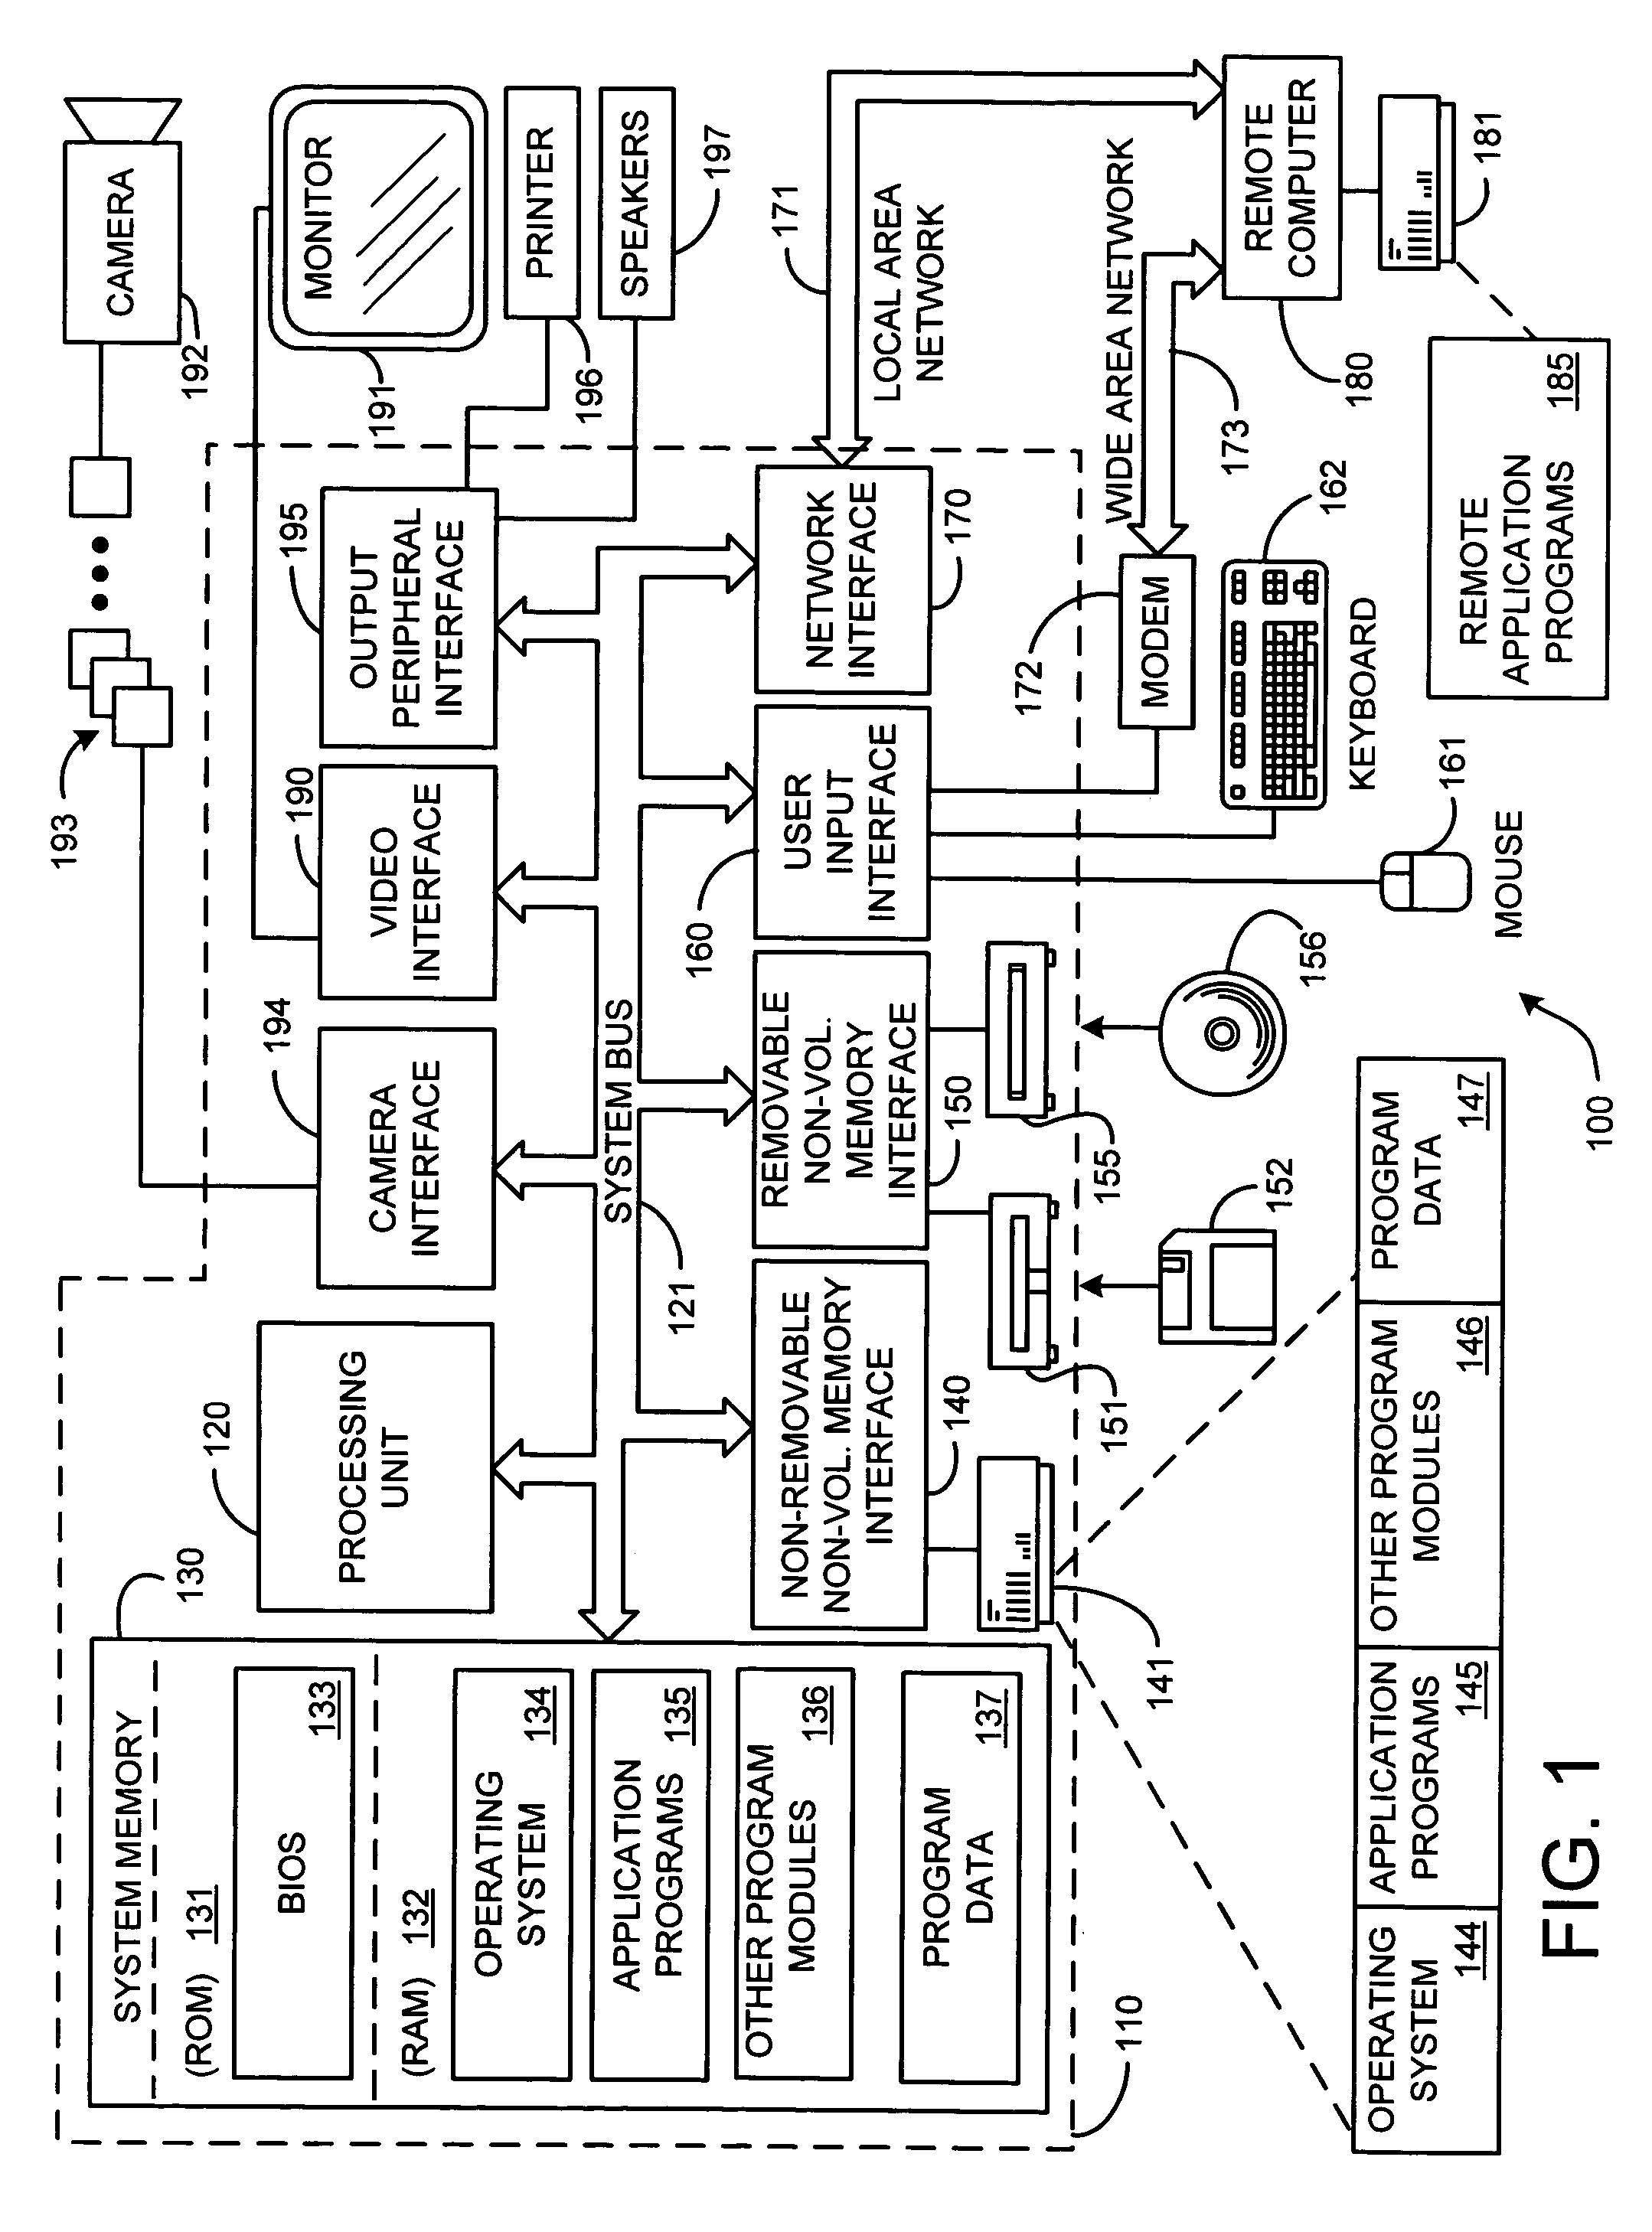 Adaptive document layout server/client system and process